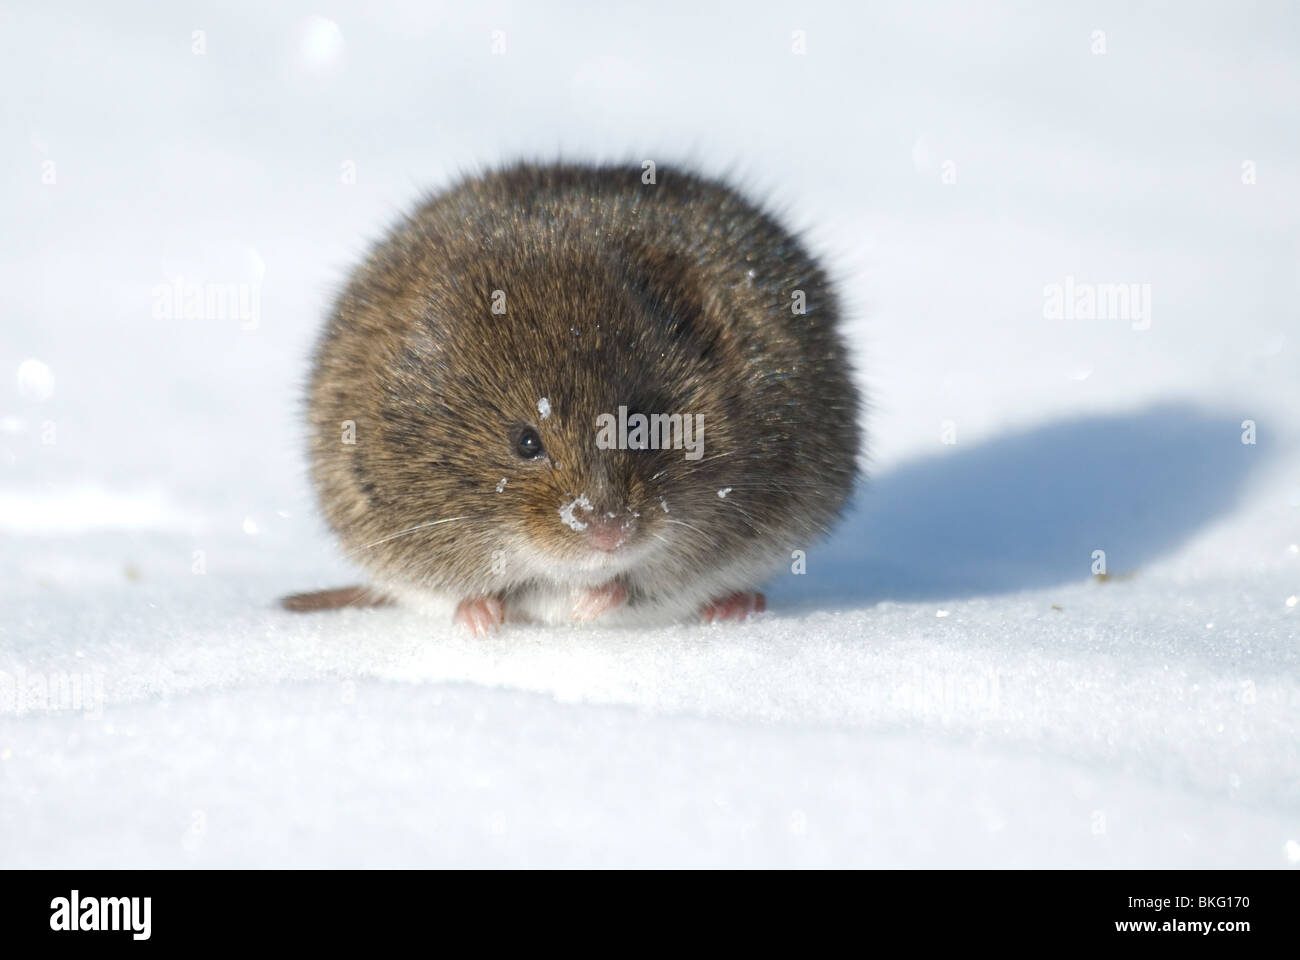 A Meadow Vole in the snow. Stock Photo